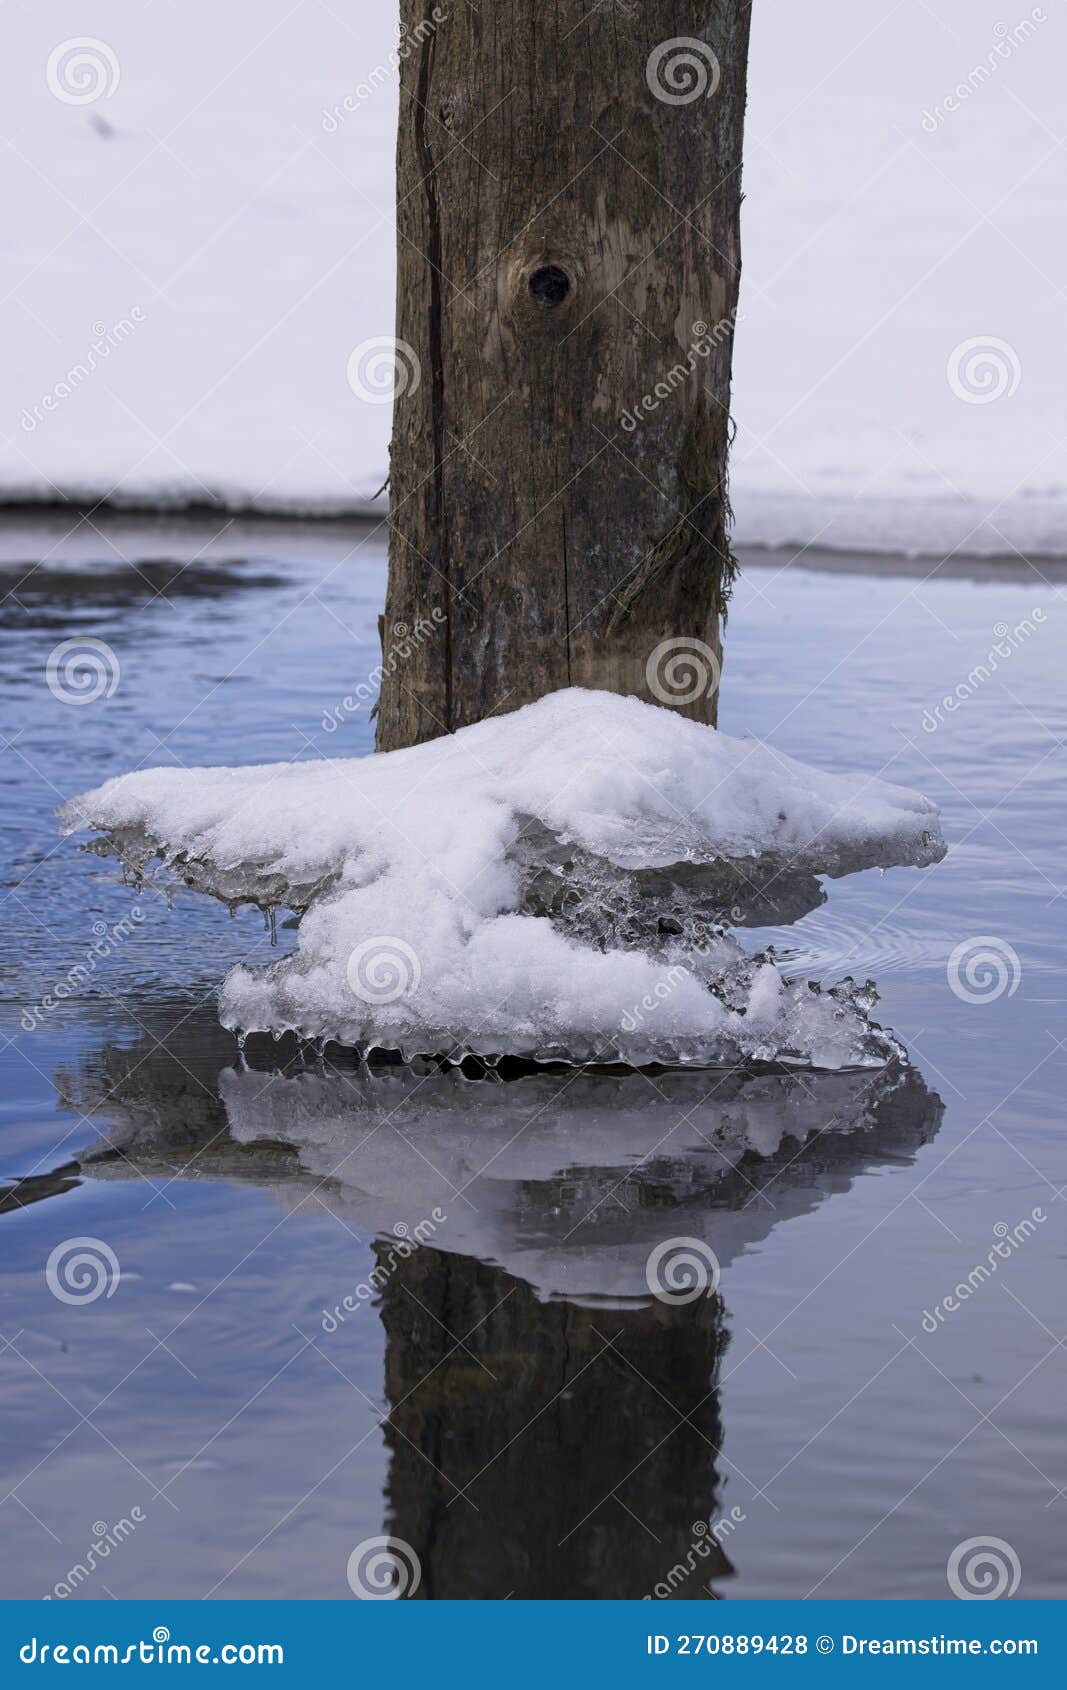 Built Up Ice in Water Against Piling in Idaho Stock Photo - Image